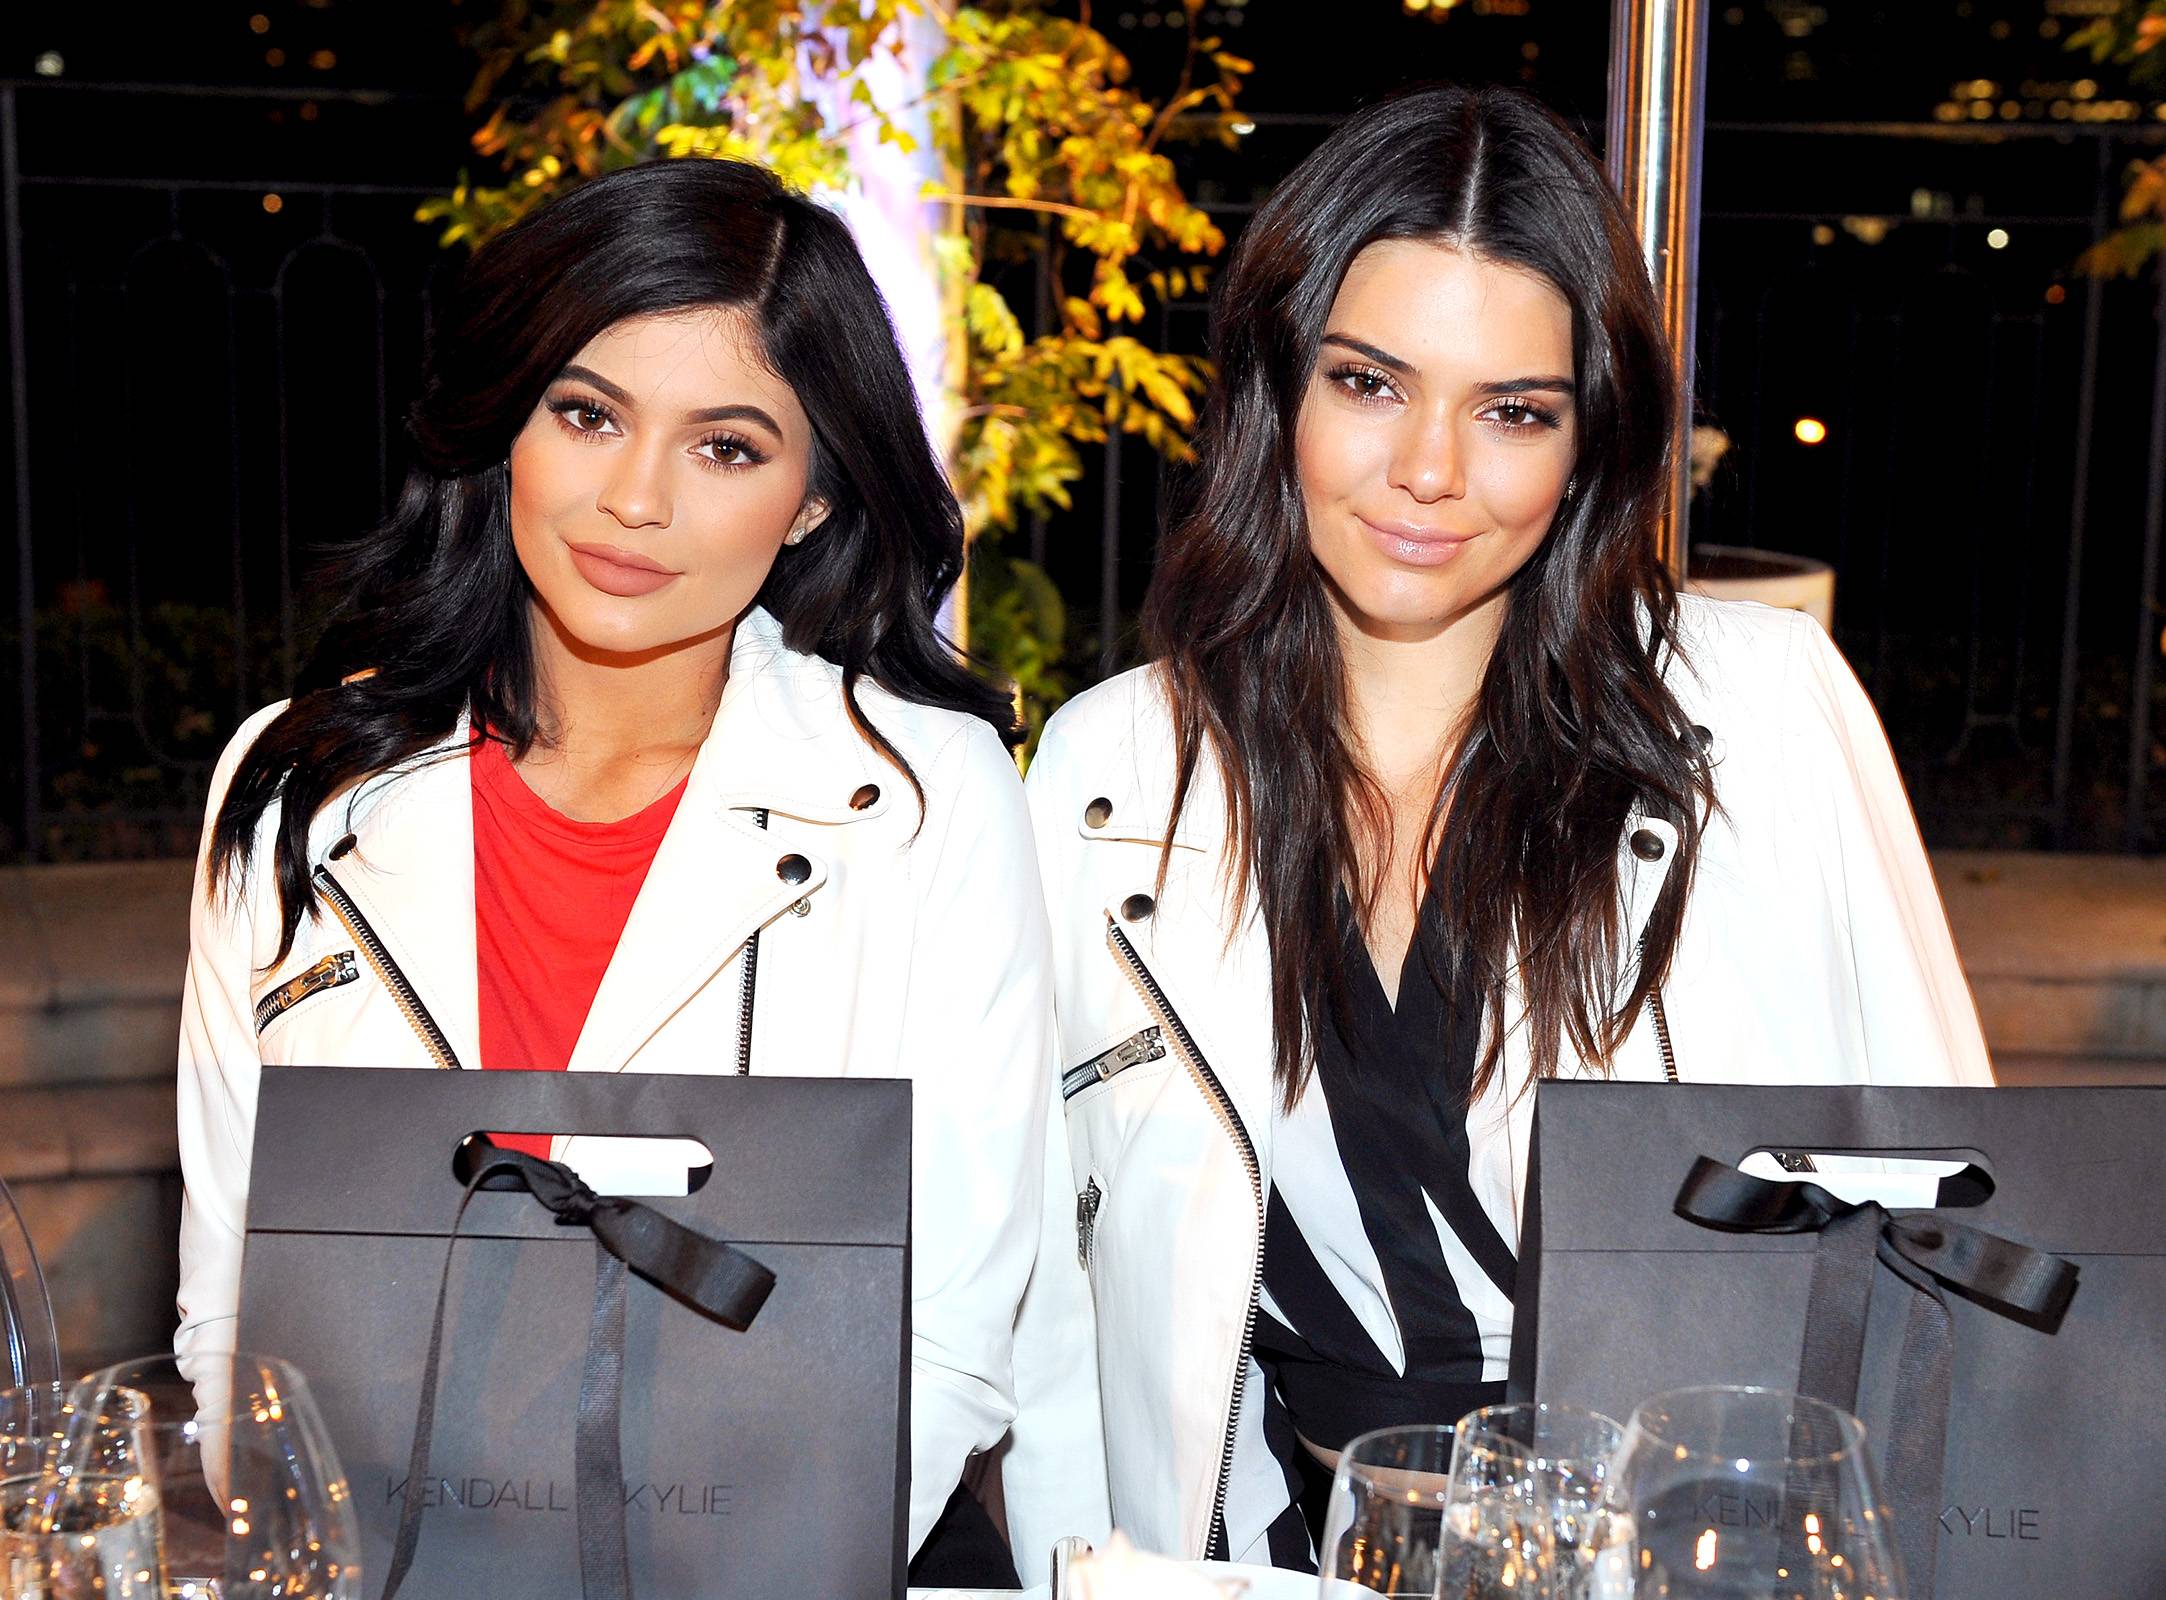 On the Karmic Retribution and Social Demise of Kylie and Kendall